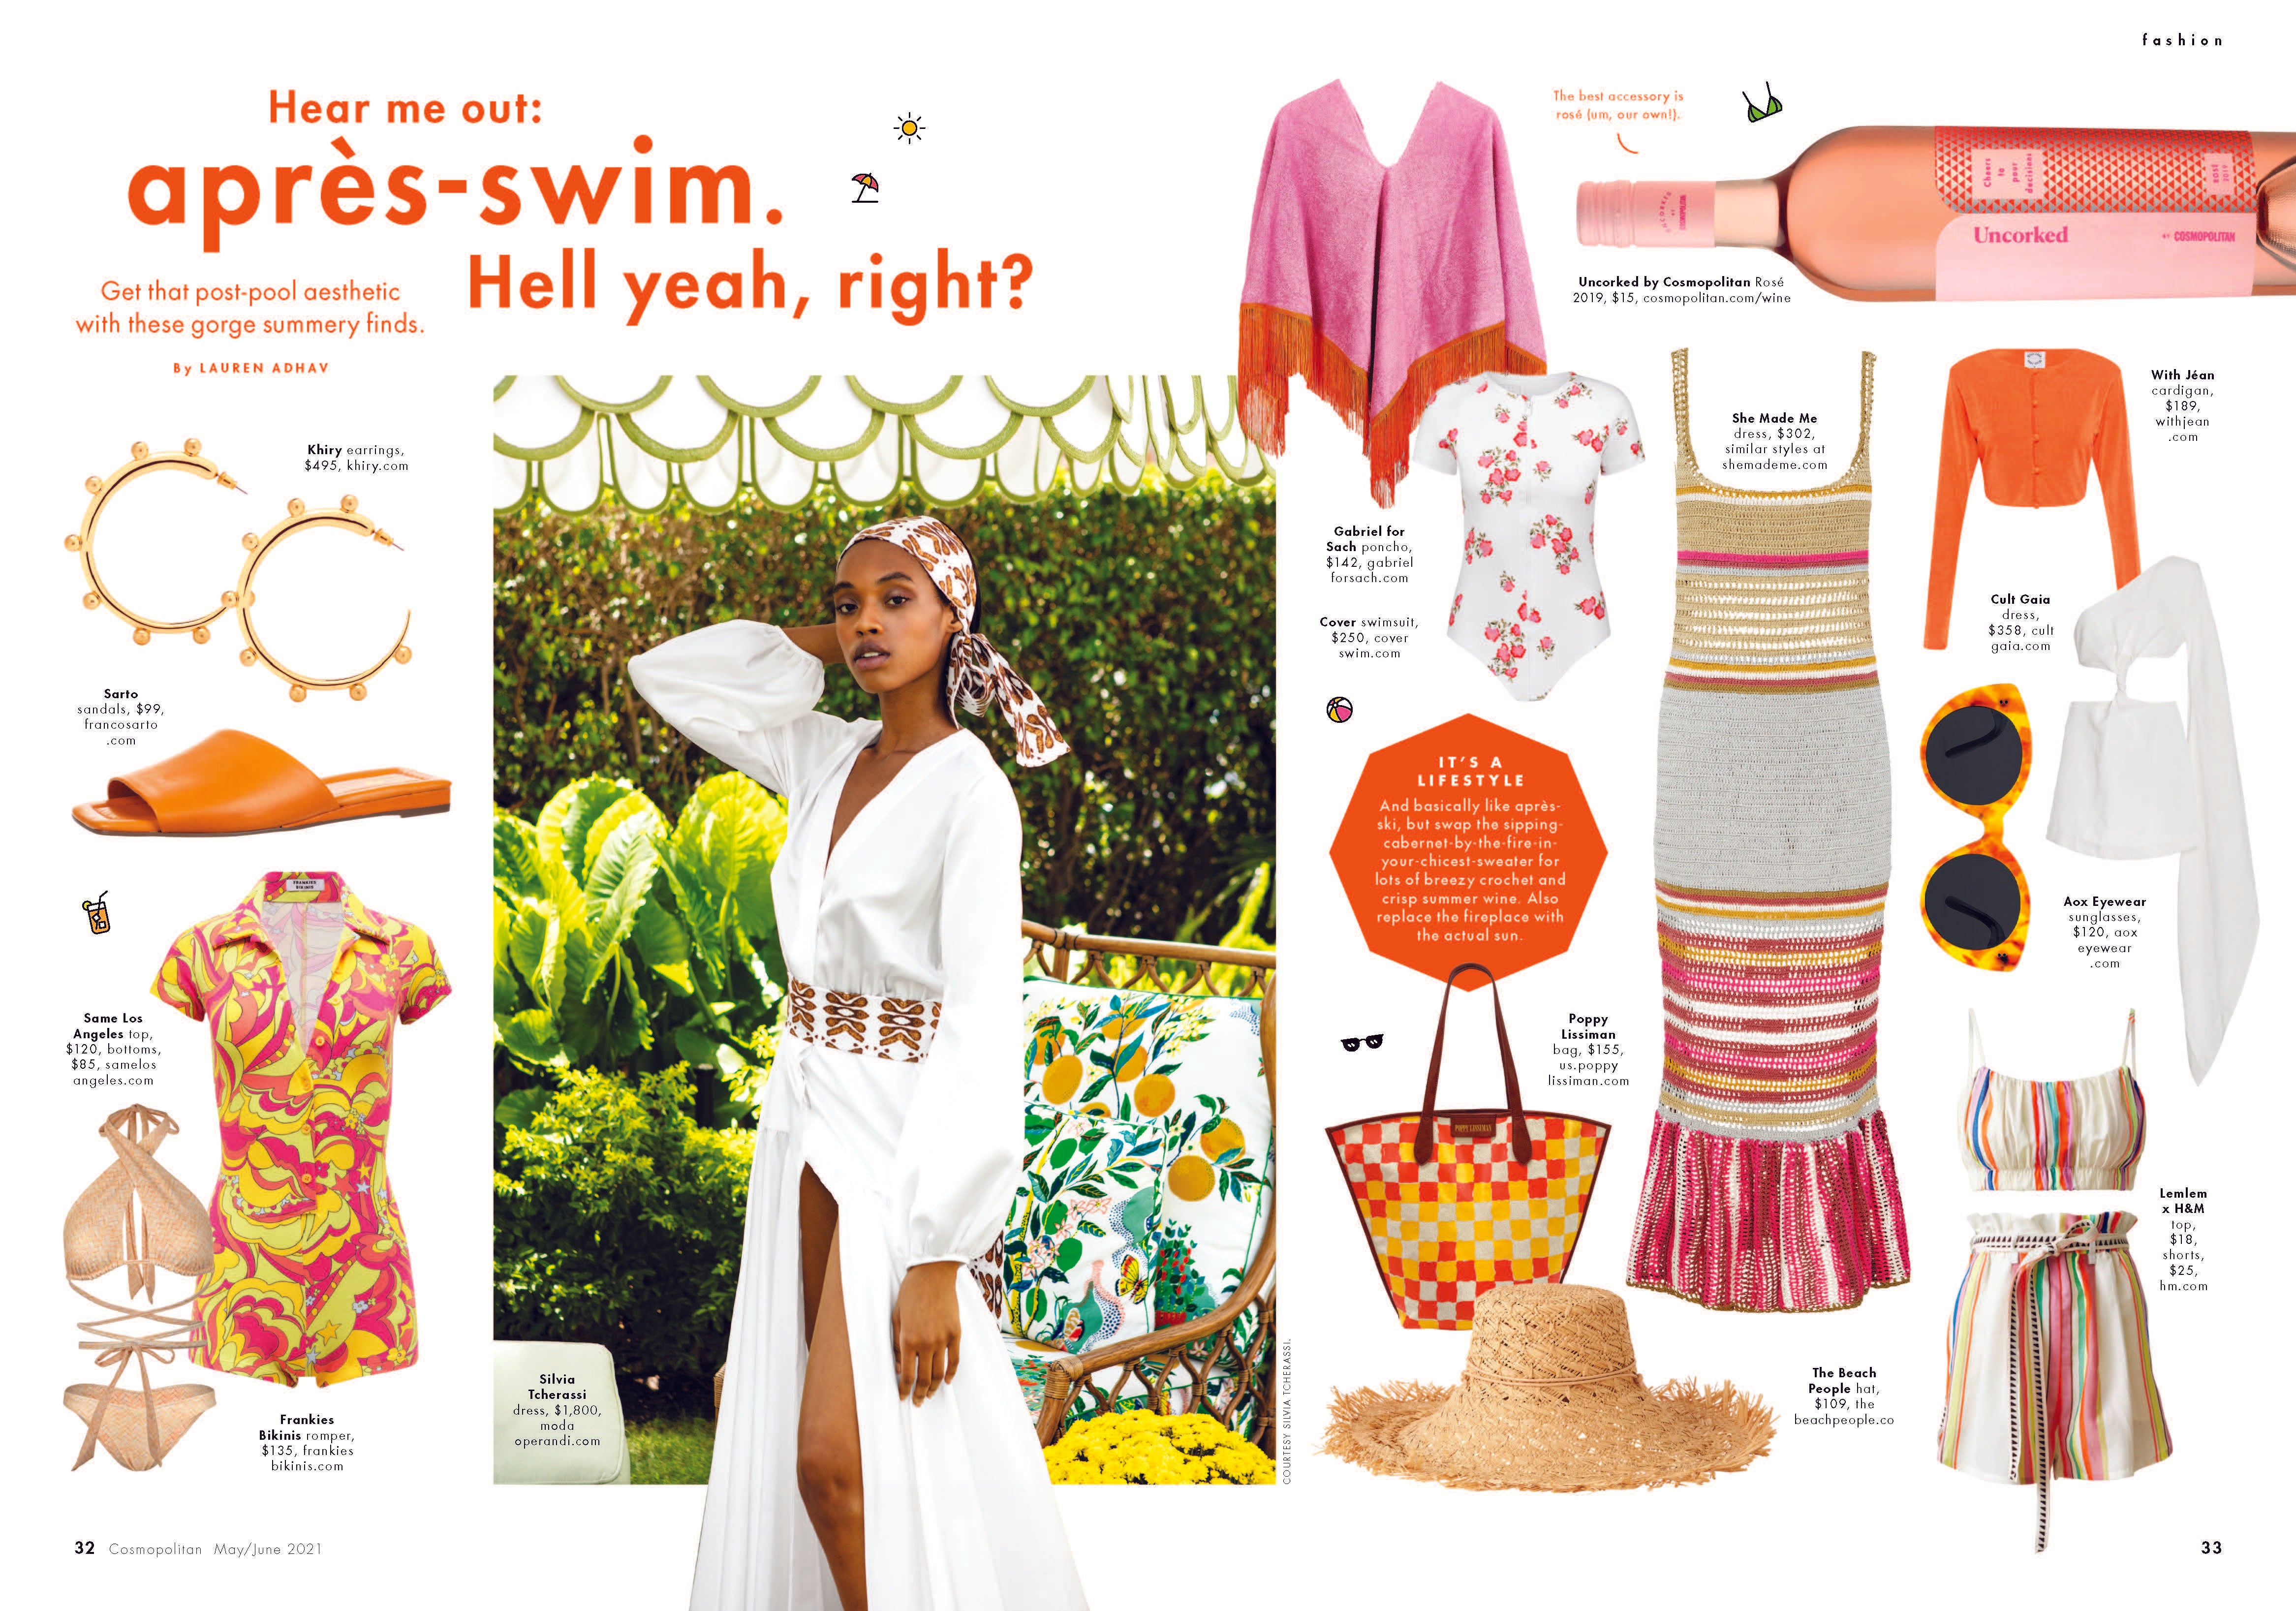 Press | View Cover Swim Features in Magazines, Websites and on Television